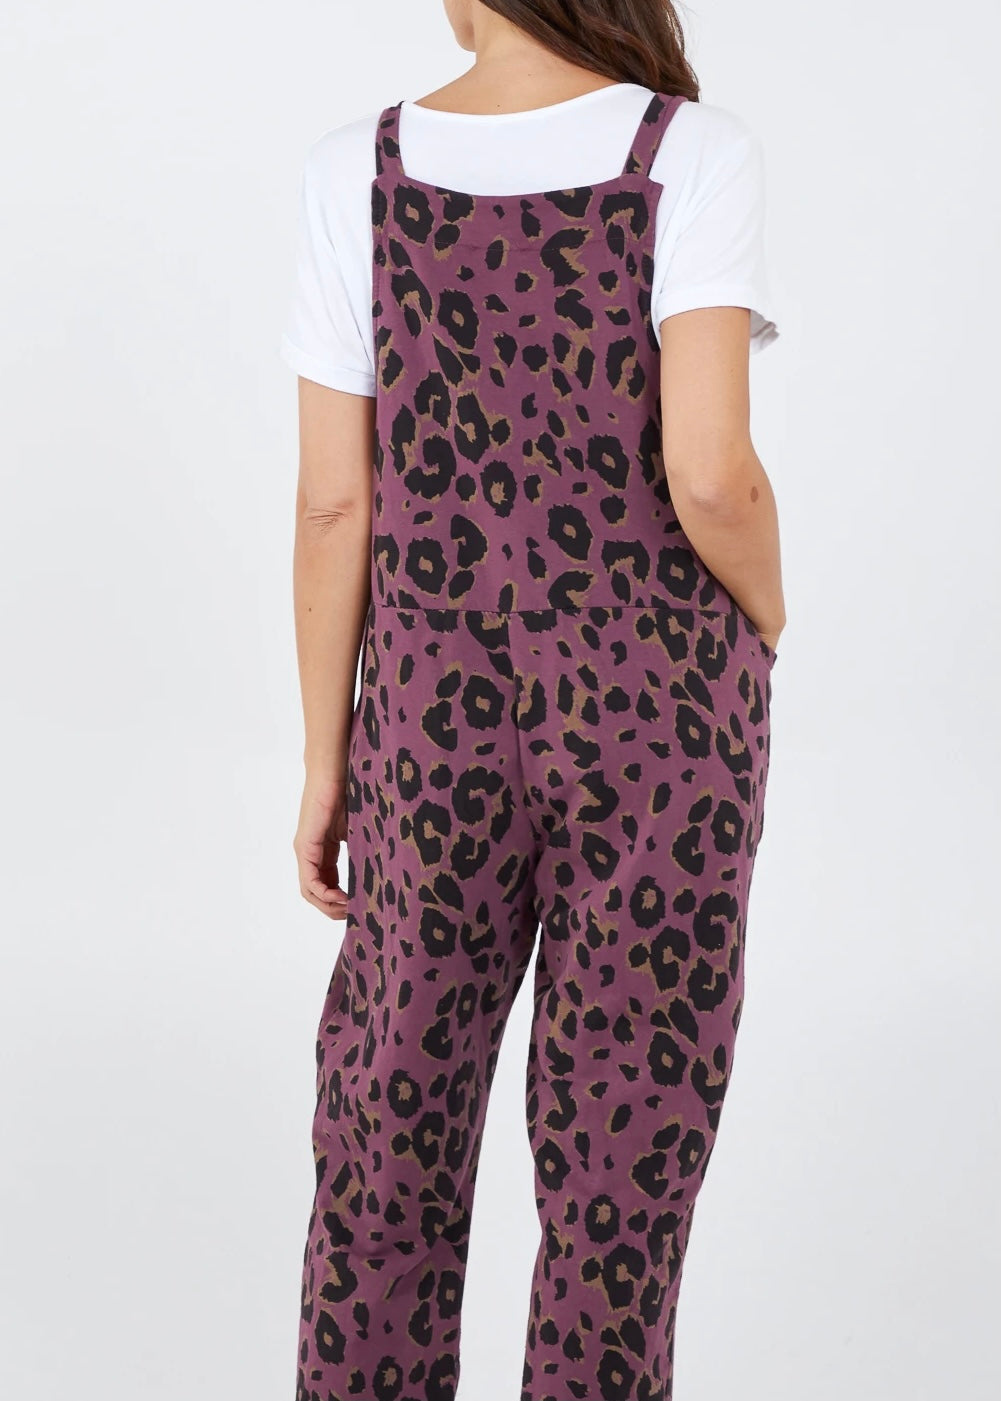 Showing the back of the Porthleven Dungarees in blackcurrent with a leopard print pattern 